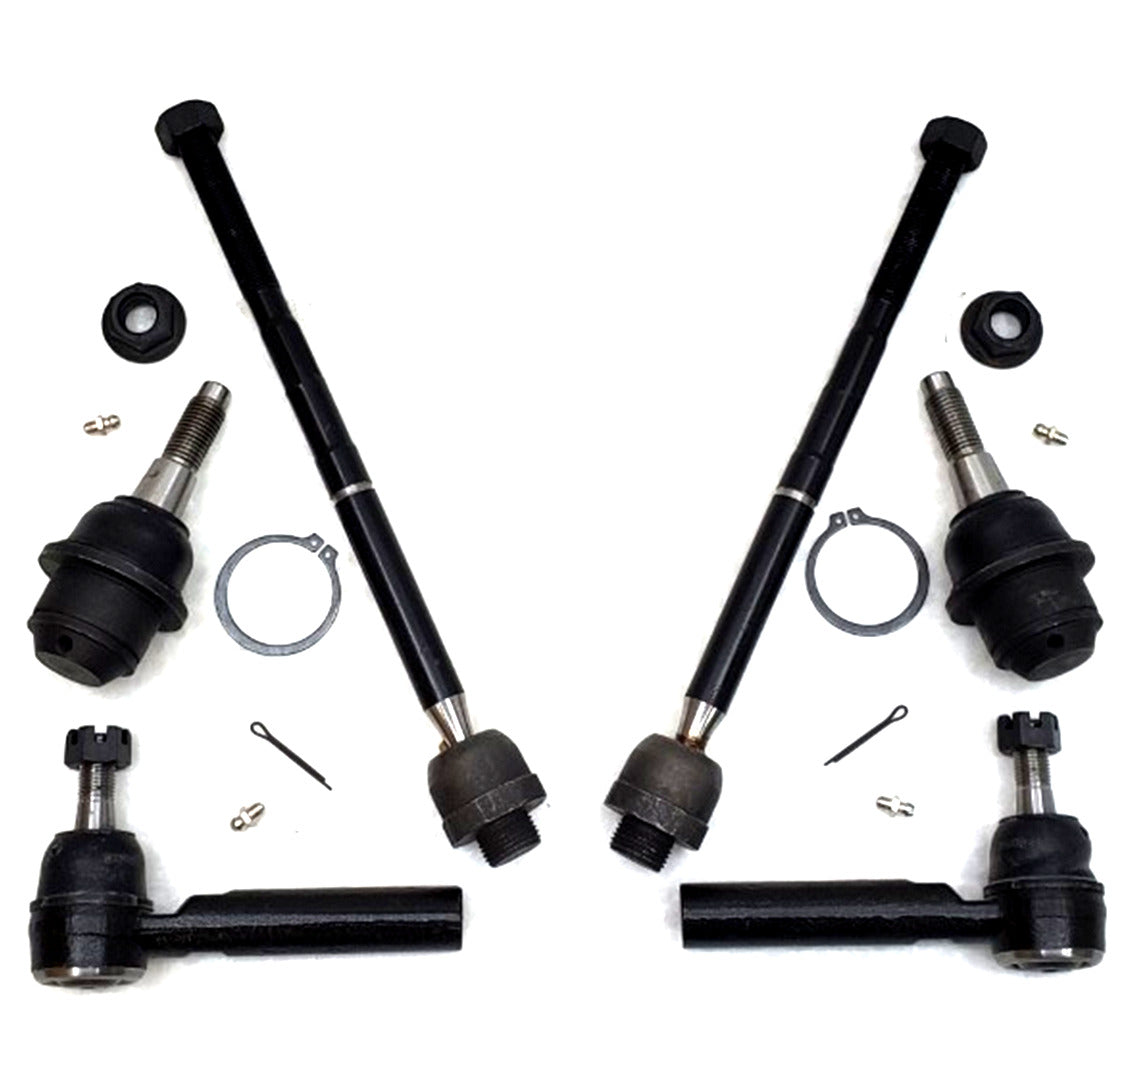 Lifetime Ball Joint and Tie Rod Steering Kit for 2007-2013 Chevrolet, GMC, Cadillac 2WD, 4x4